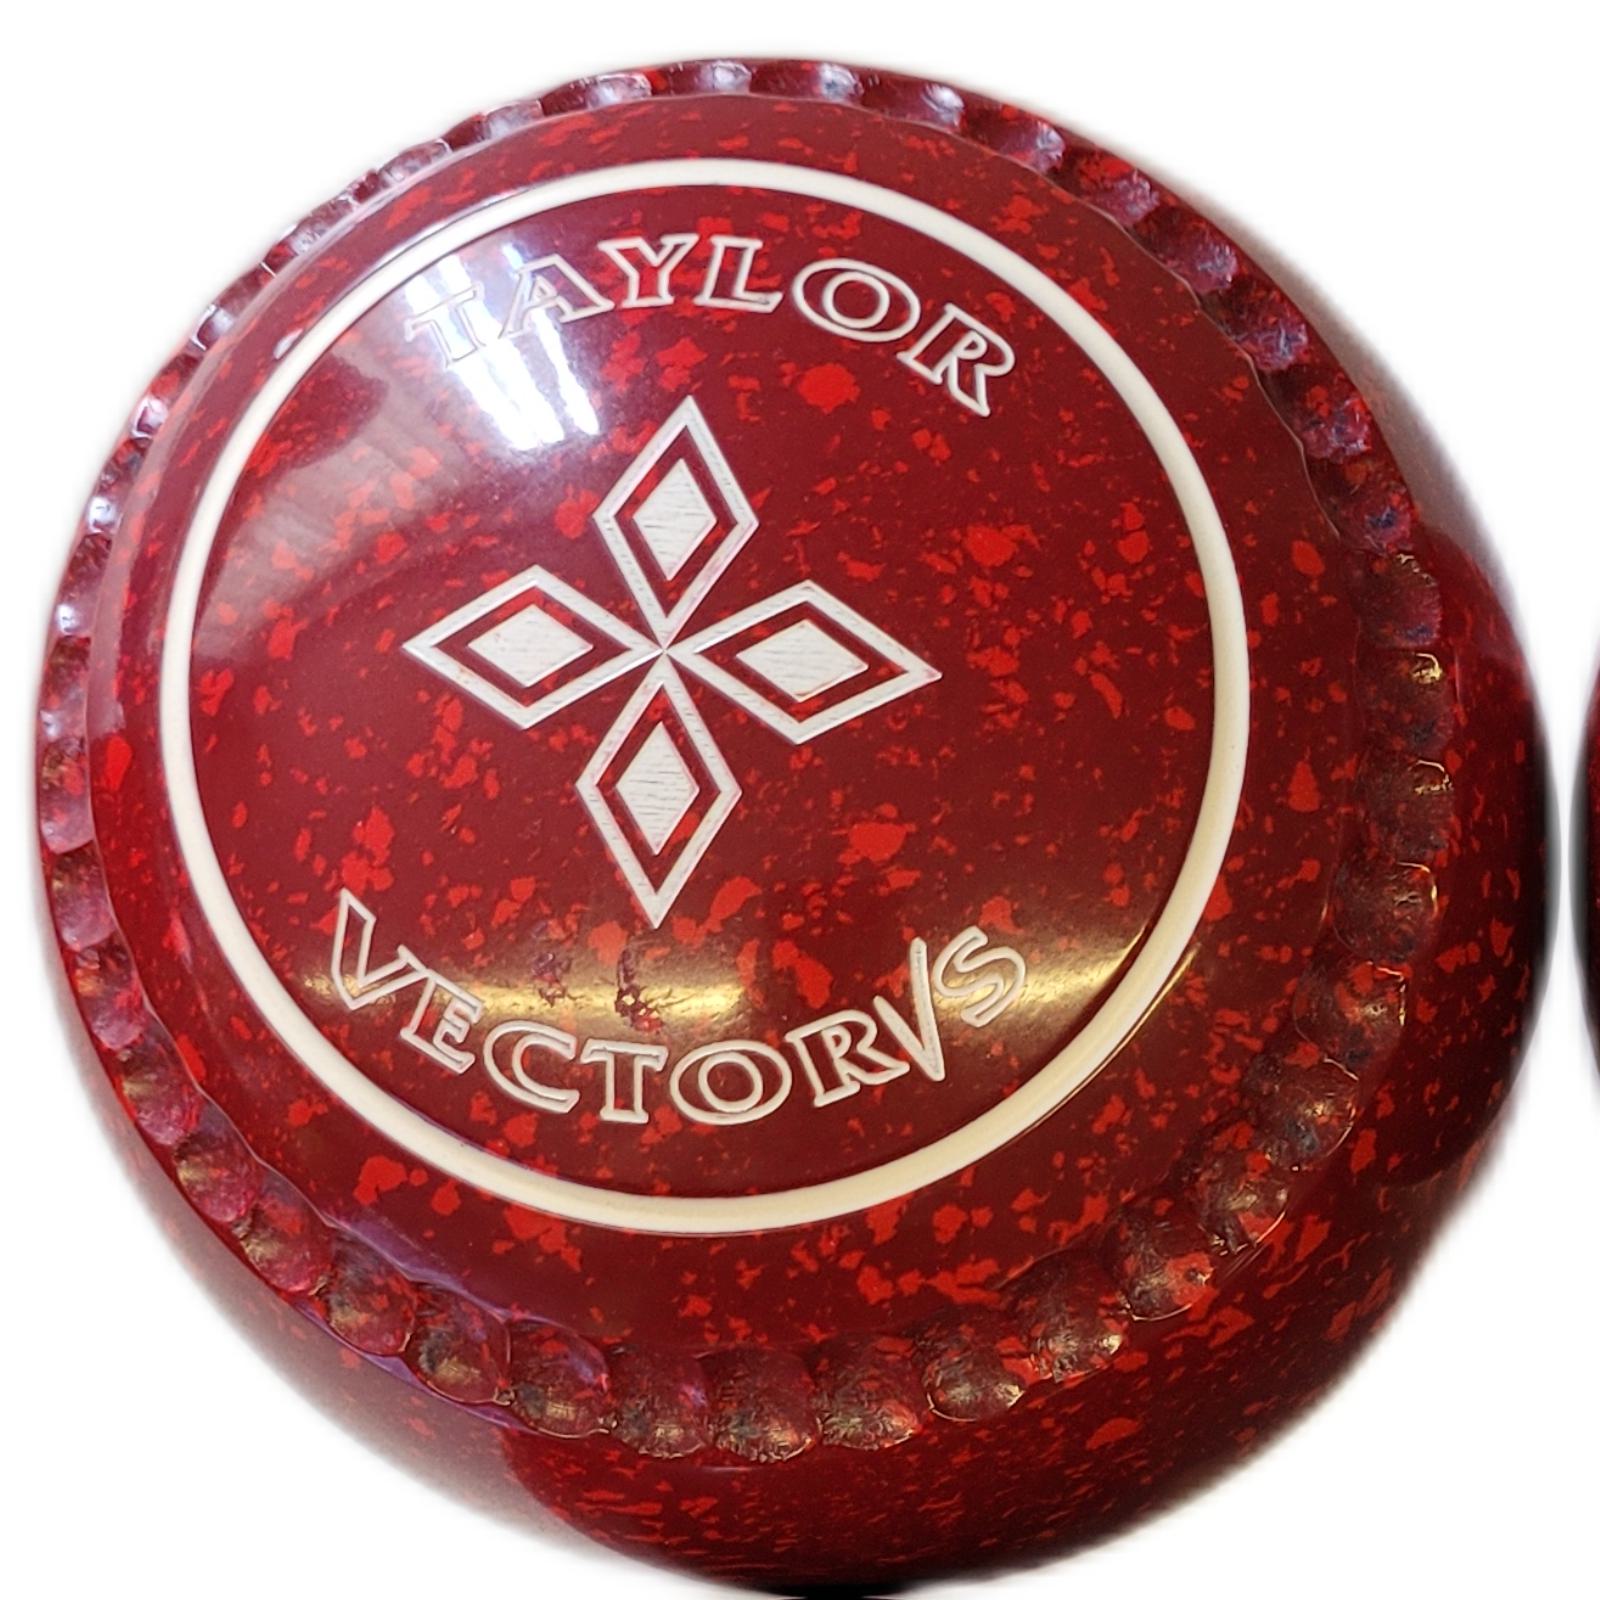 Taylor Vector VS 4H Maroon/Red Xtreme Grip